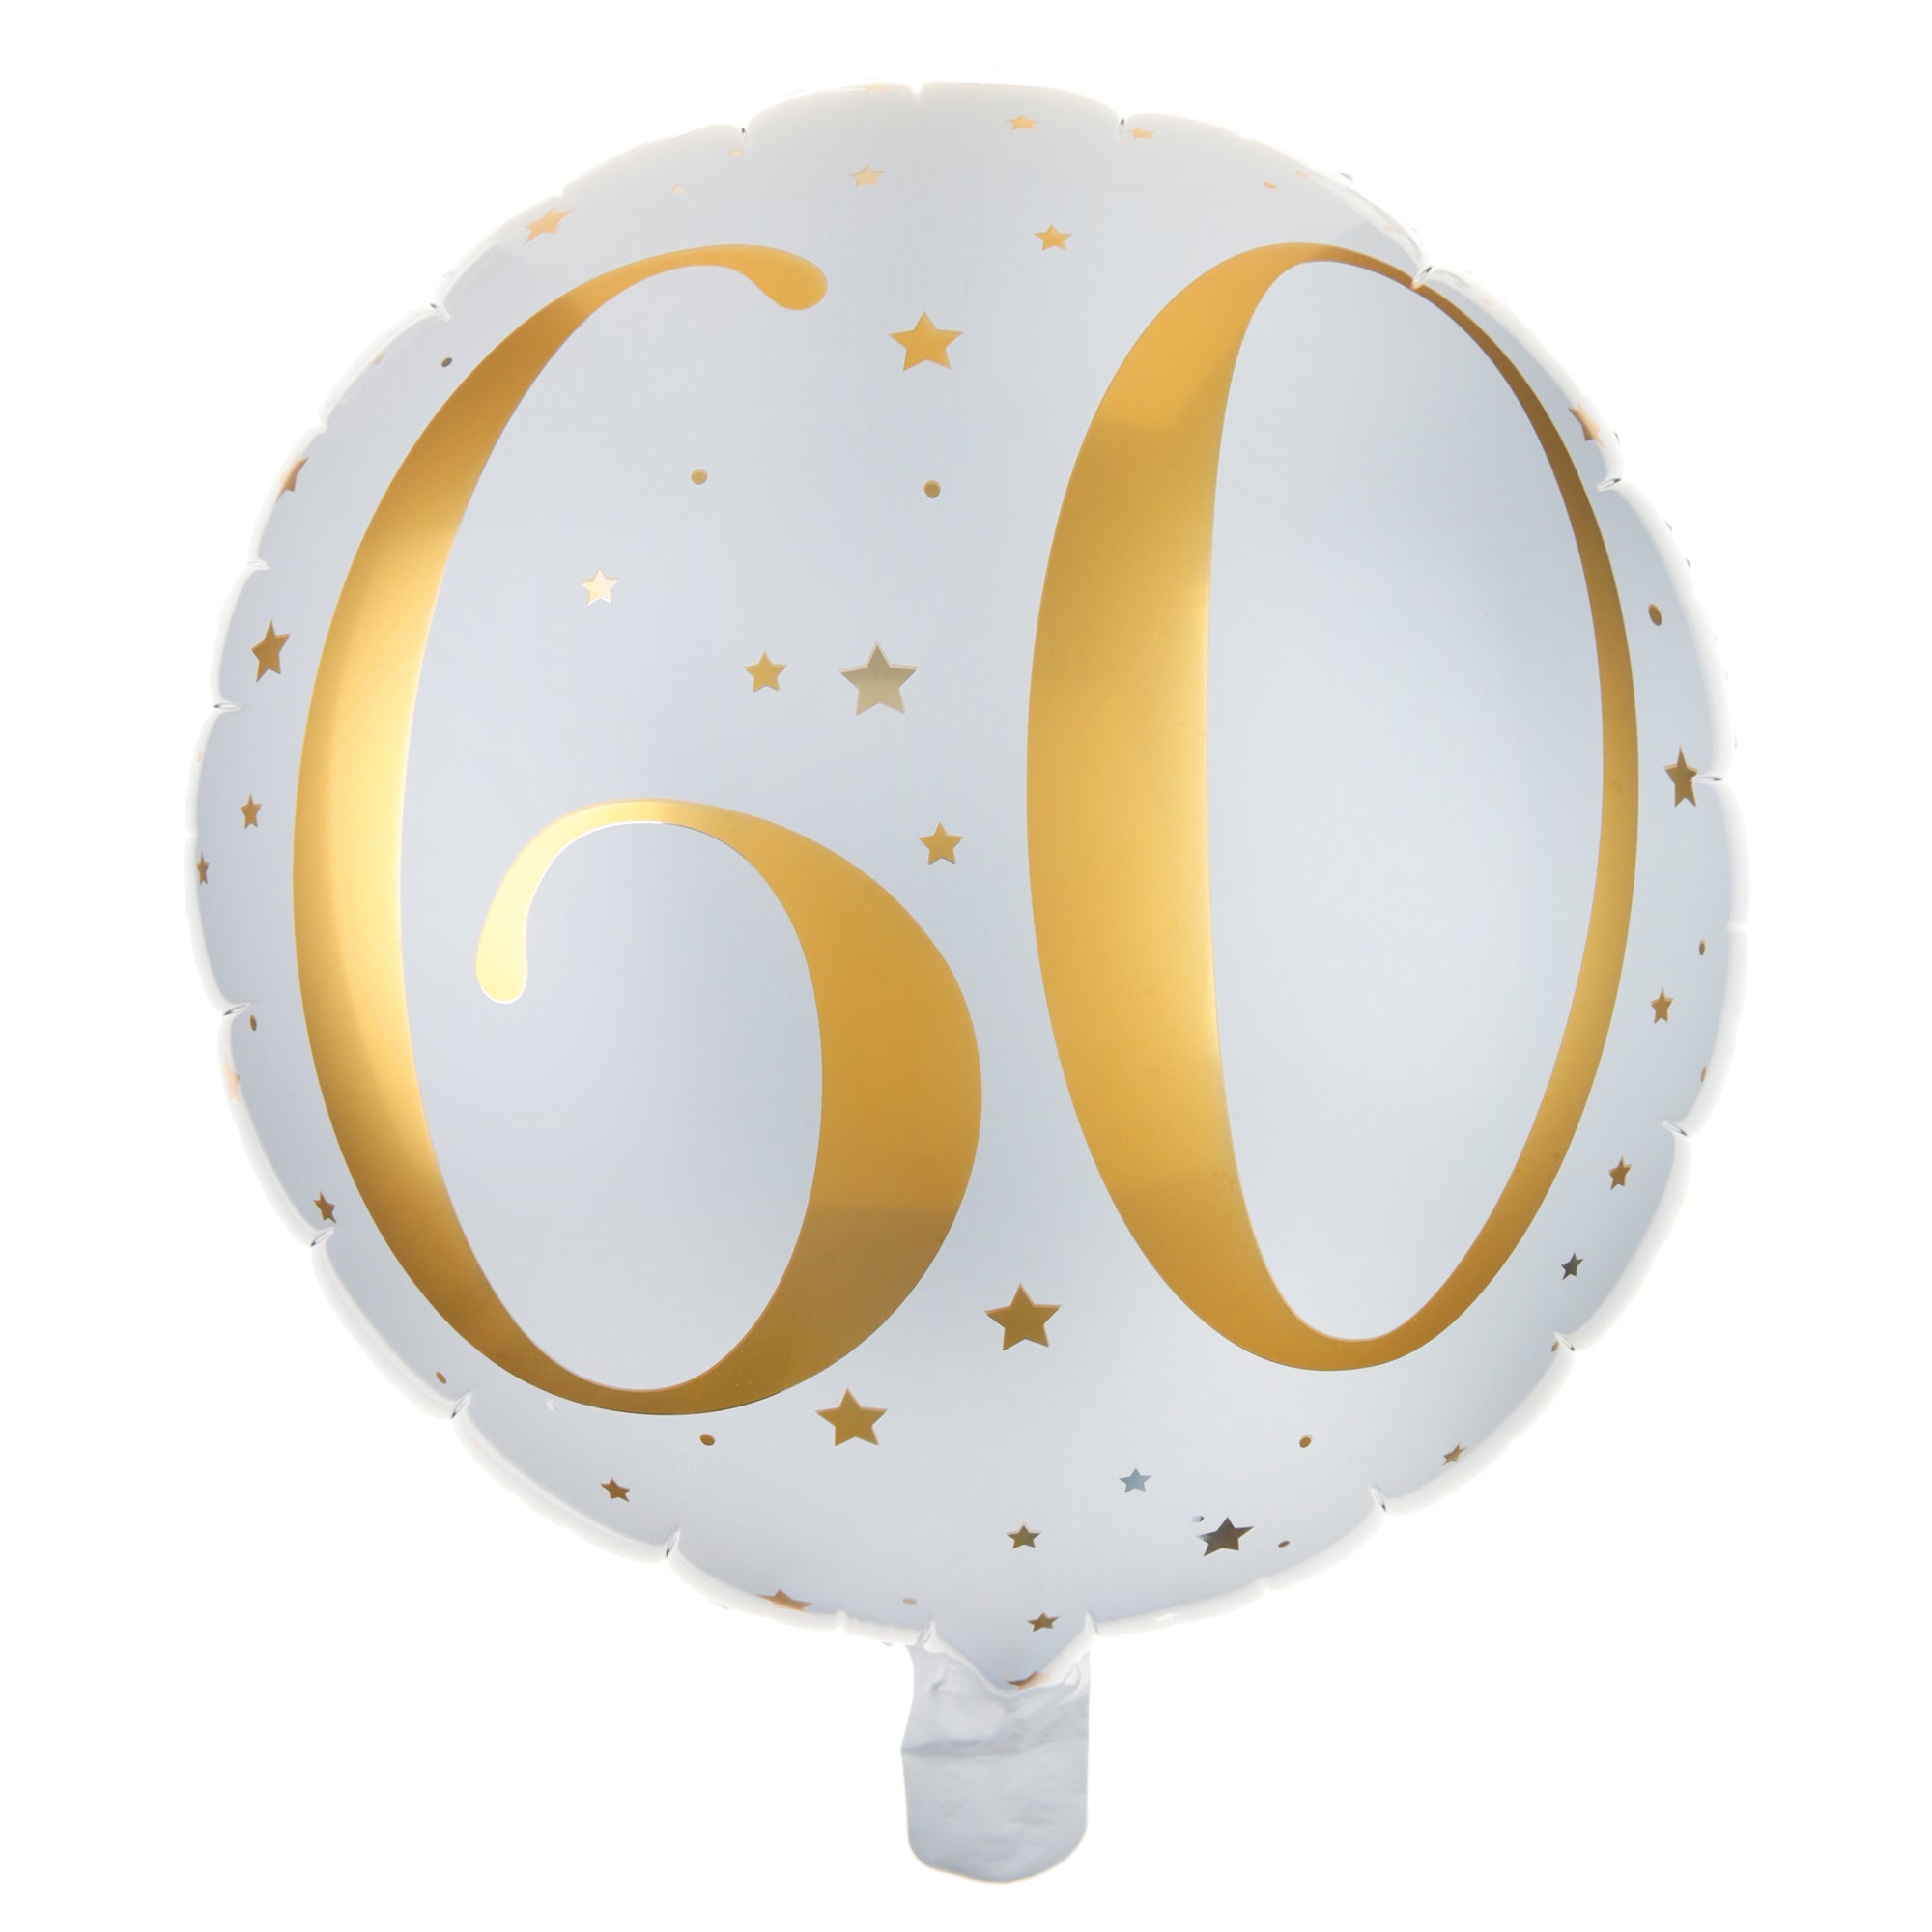 Age 60 Foil Balloon White and Gold 18in